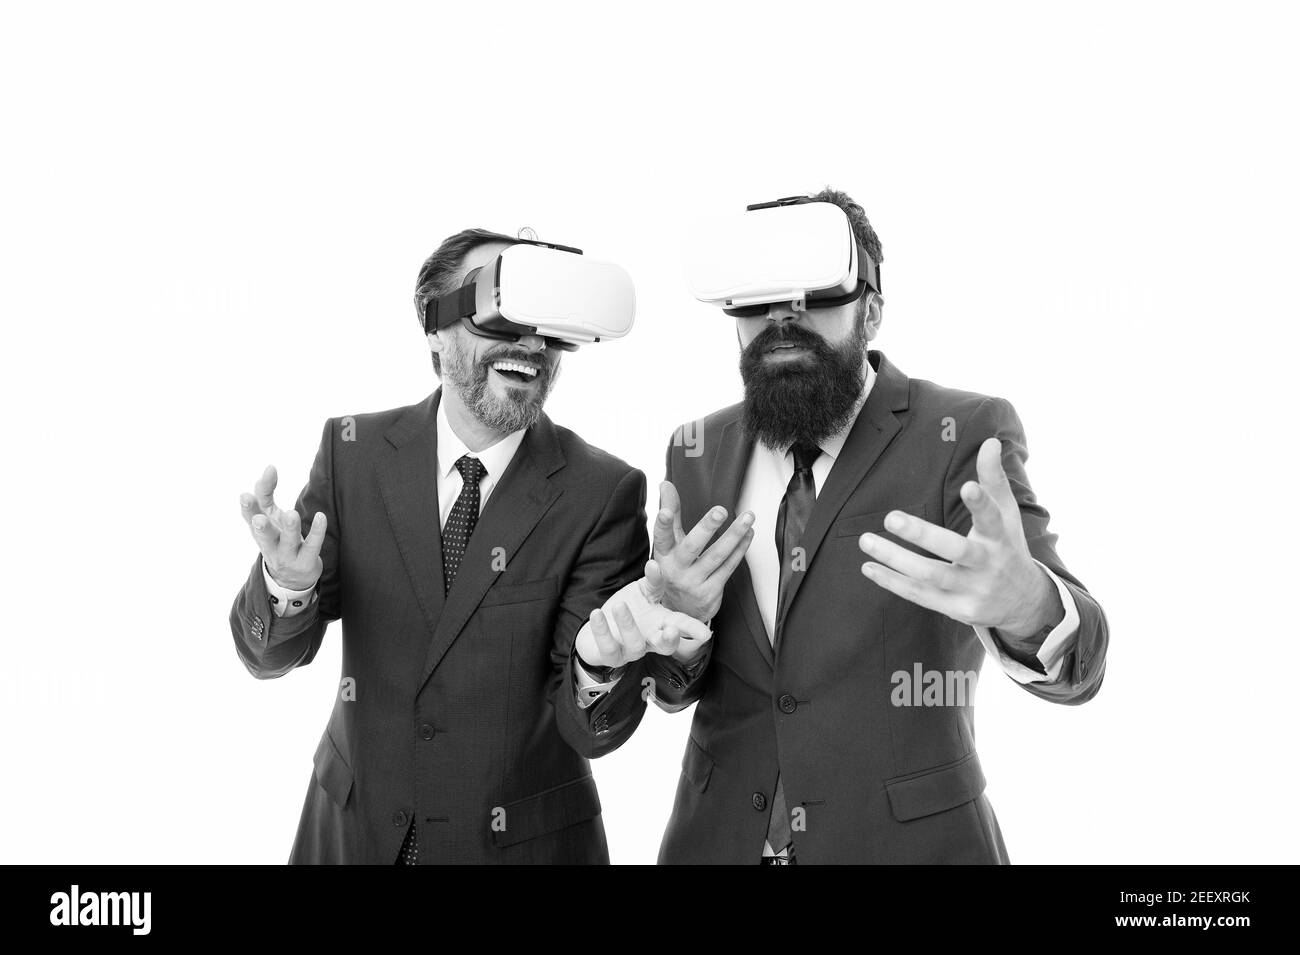 Working with innovative technologies. virtual reality. Partnership and teamwork. mature men with beard in formal suit. businessmen wear VR glasses. modern technology in agile business. Digital future. Stock Photo